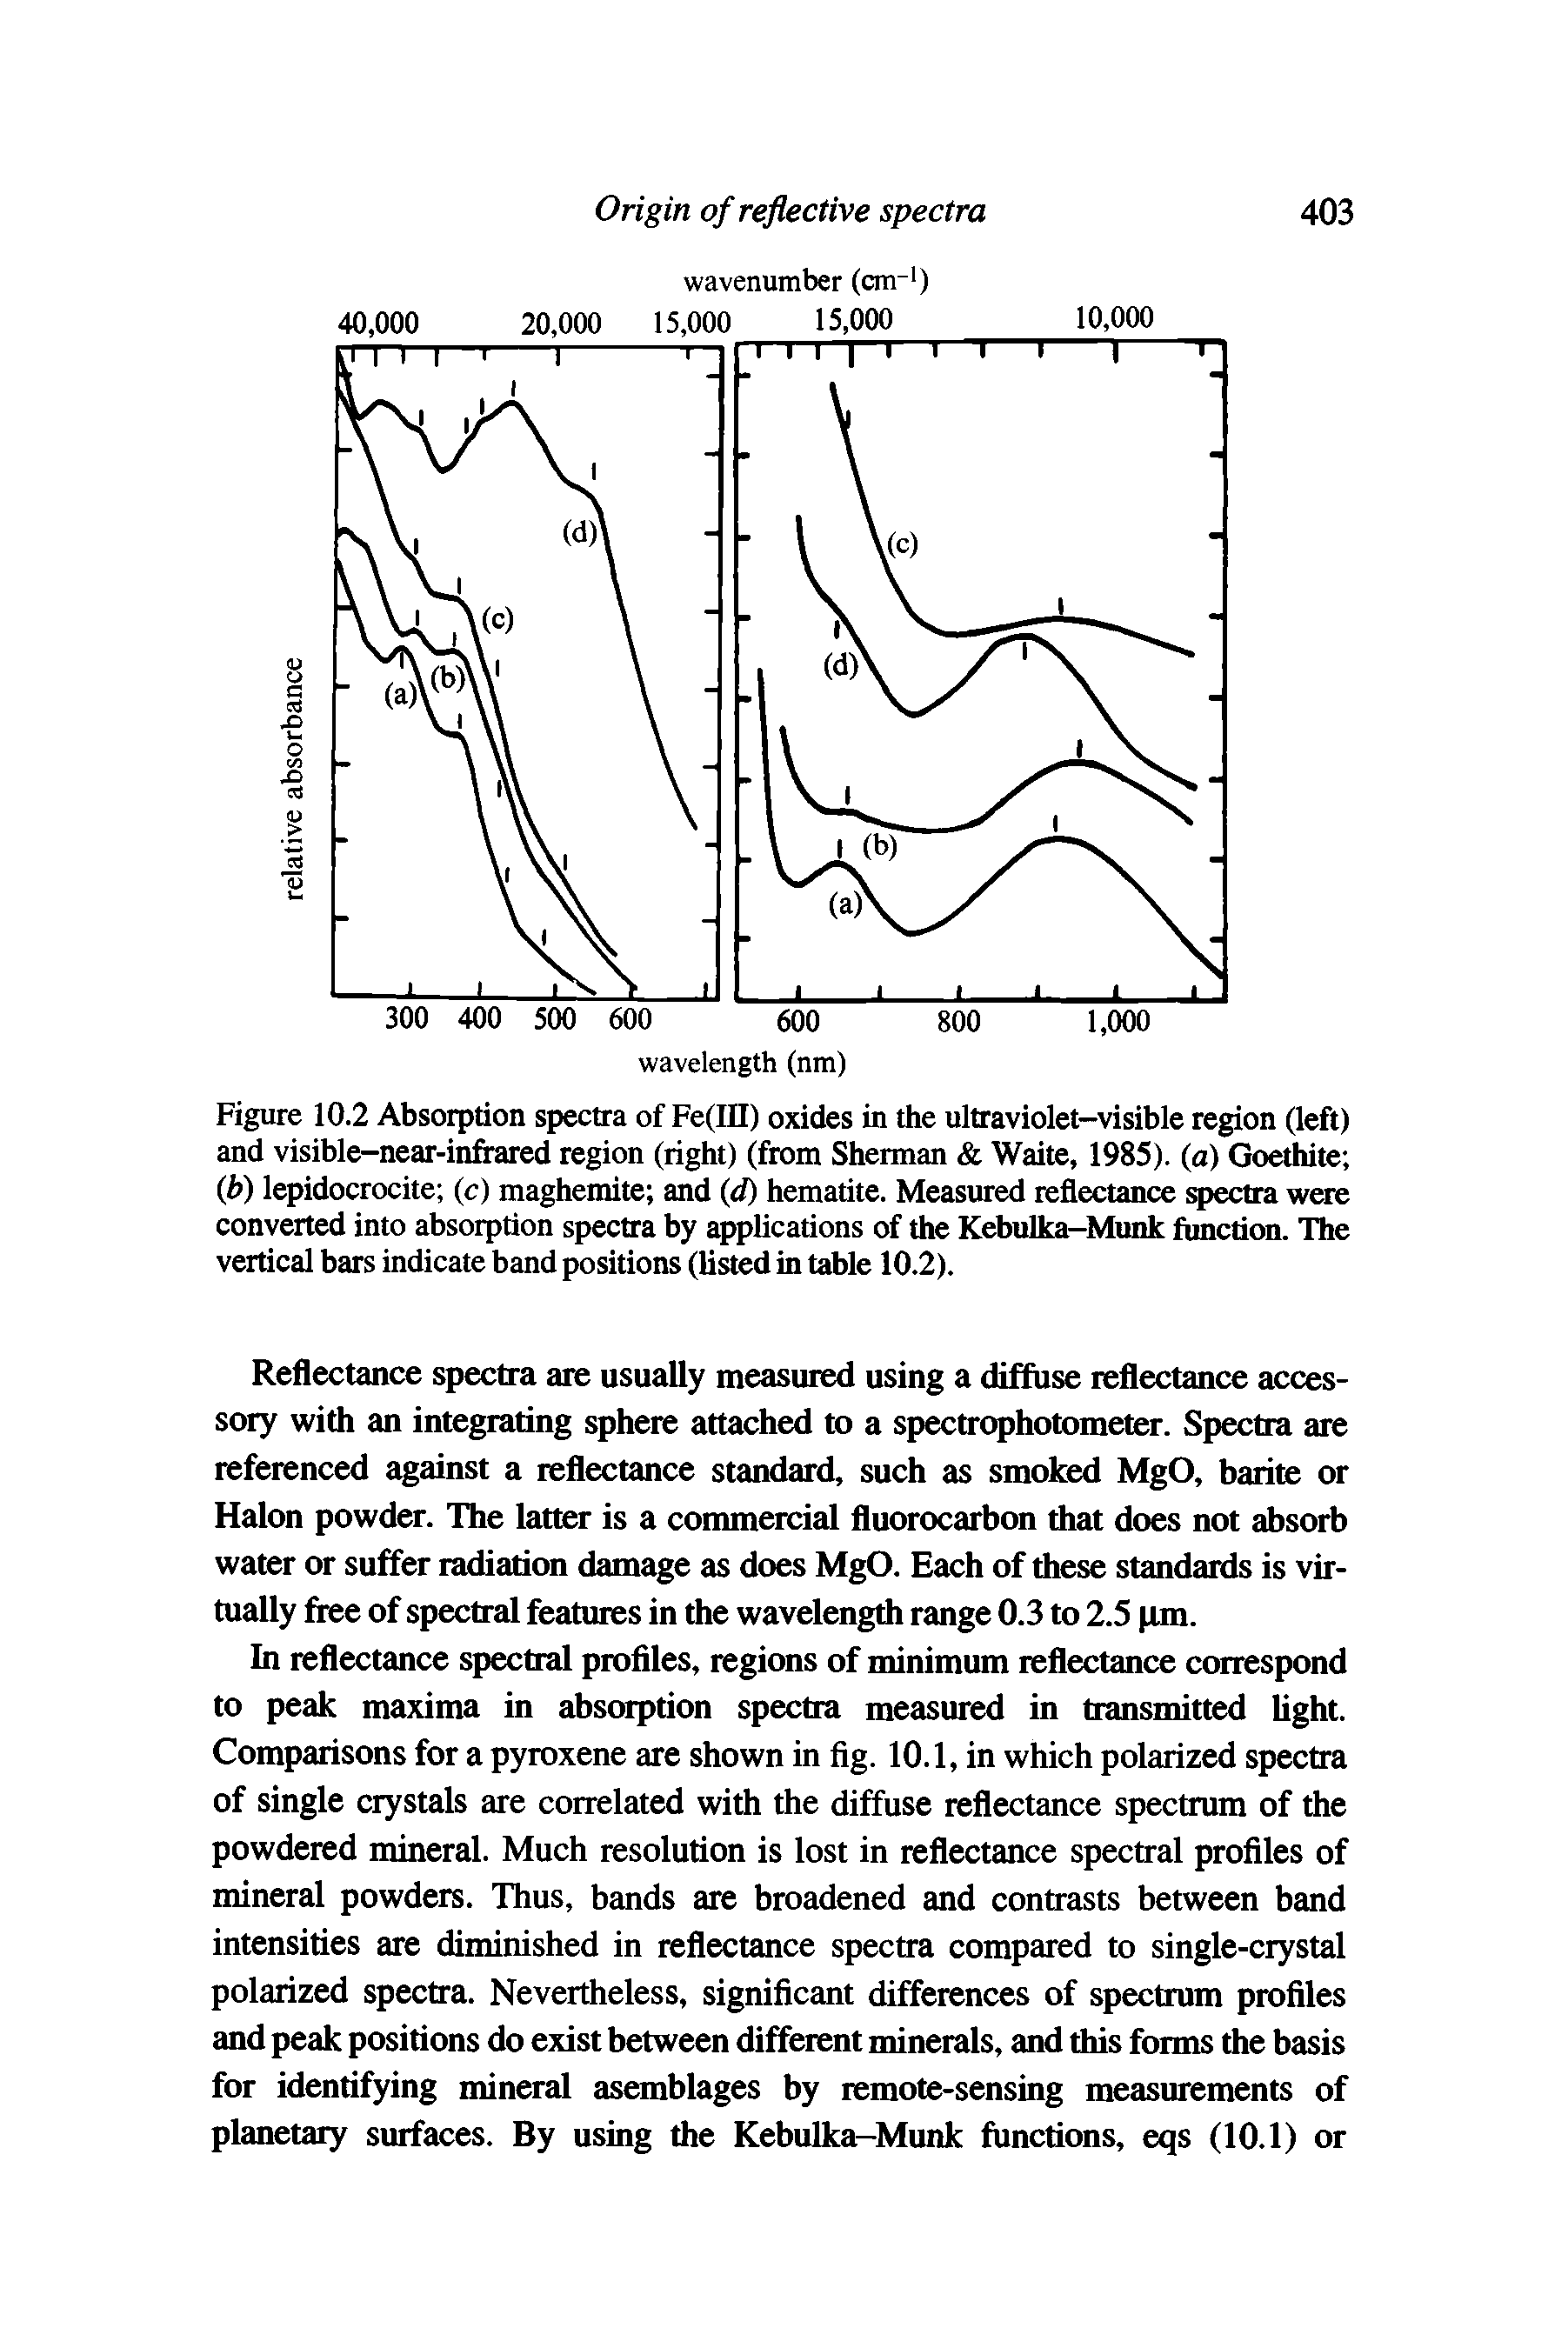 Figure 10.2 Absorption spectra of Fe(III) oxides in the ultraviolet-visible region (left) and visible-near-infrared region (right) (from Sherman Waite, 1985). (a) Goethite (b) lepidocrocite (c) maghemite and (d) hematite. Measured reflectance spectra were converted into absorption spectra by applications of the Kebulka-Munk function. The vertical bars indicate band positions (listed in table 10.2).